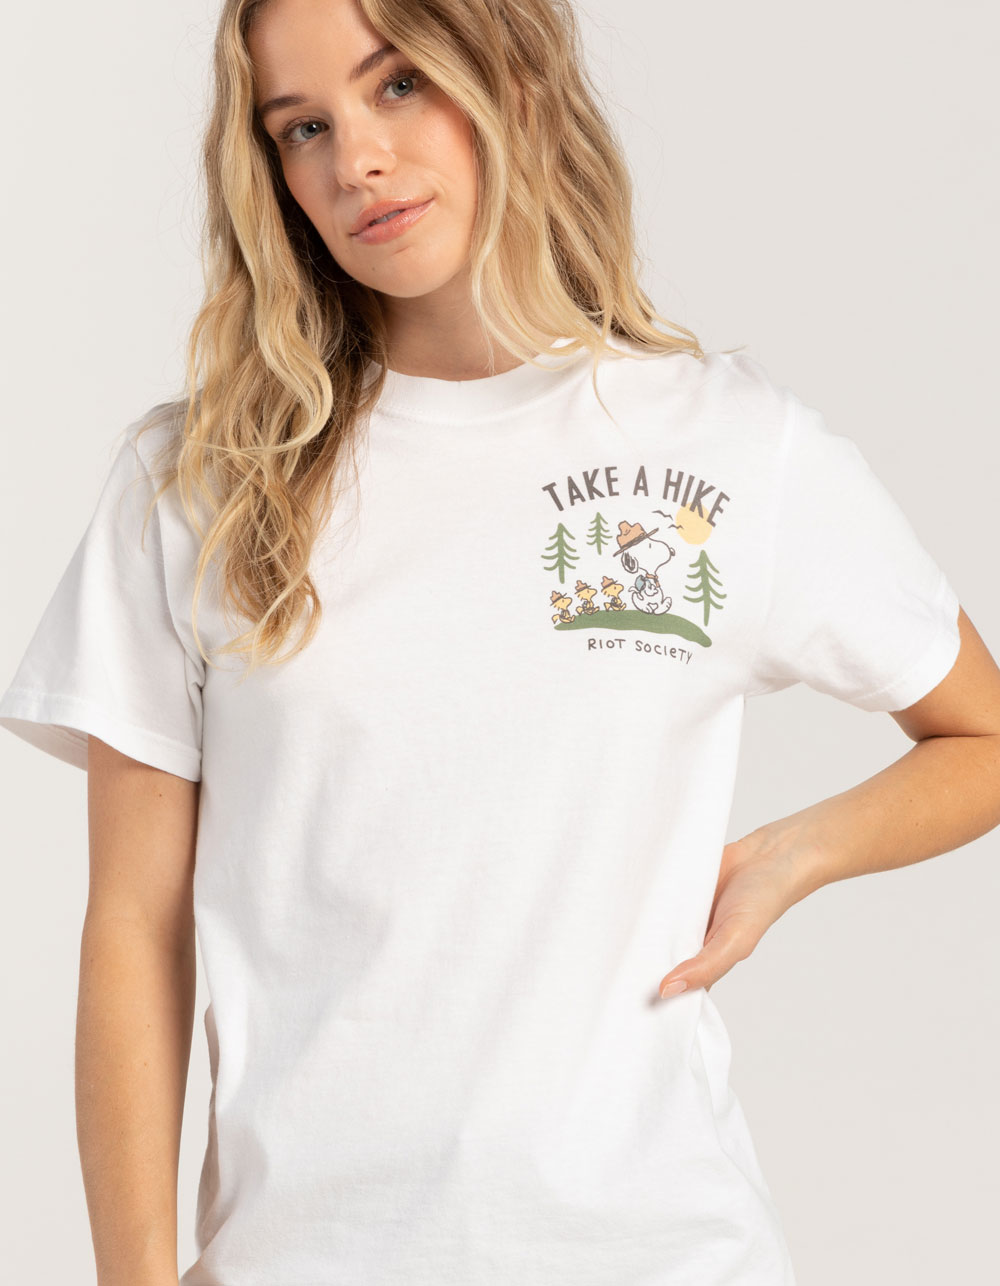 RIOT SOCIETY Take A Hike Peanuts Womens Tee - WHITE | Tillys